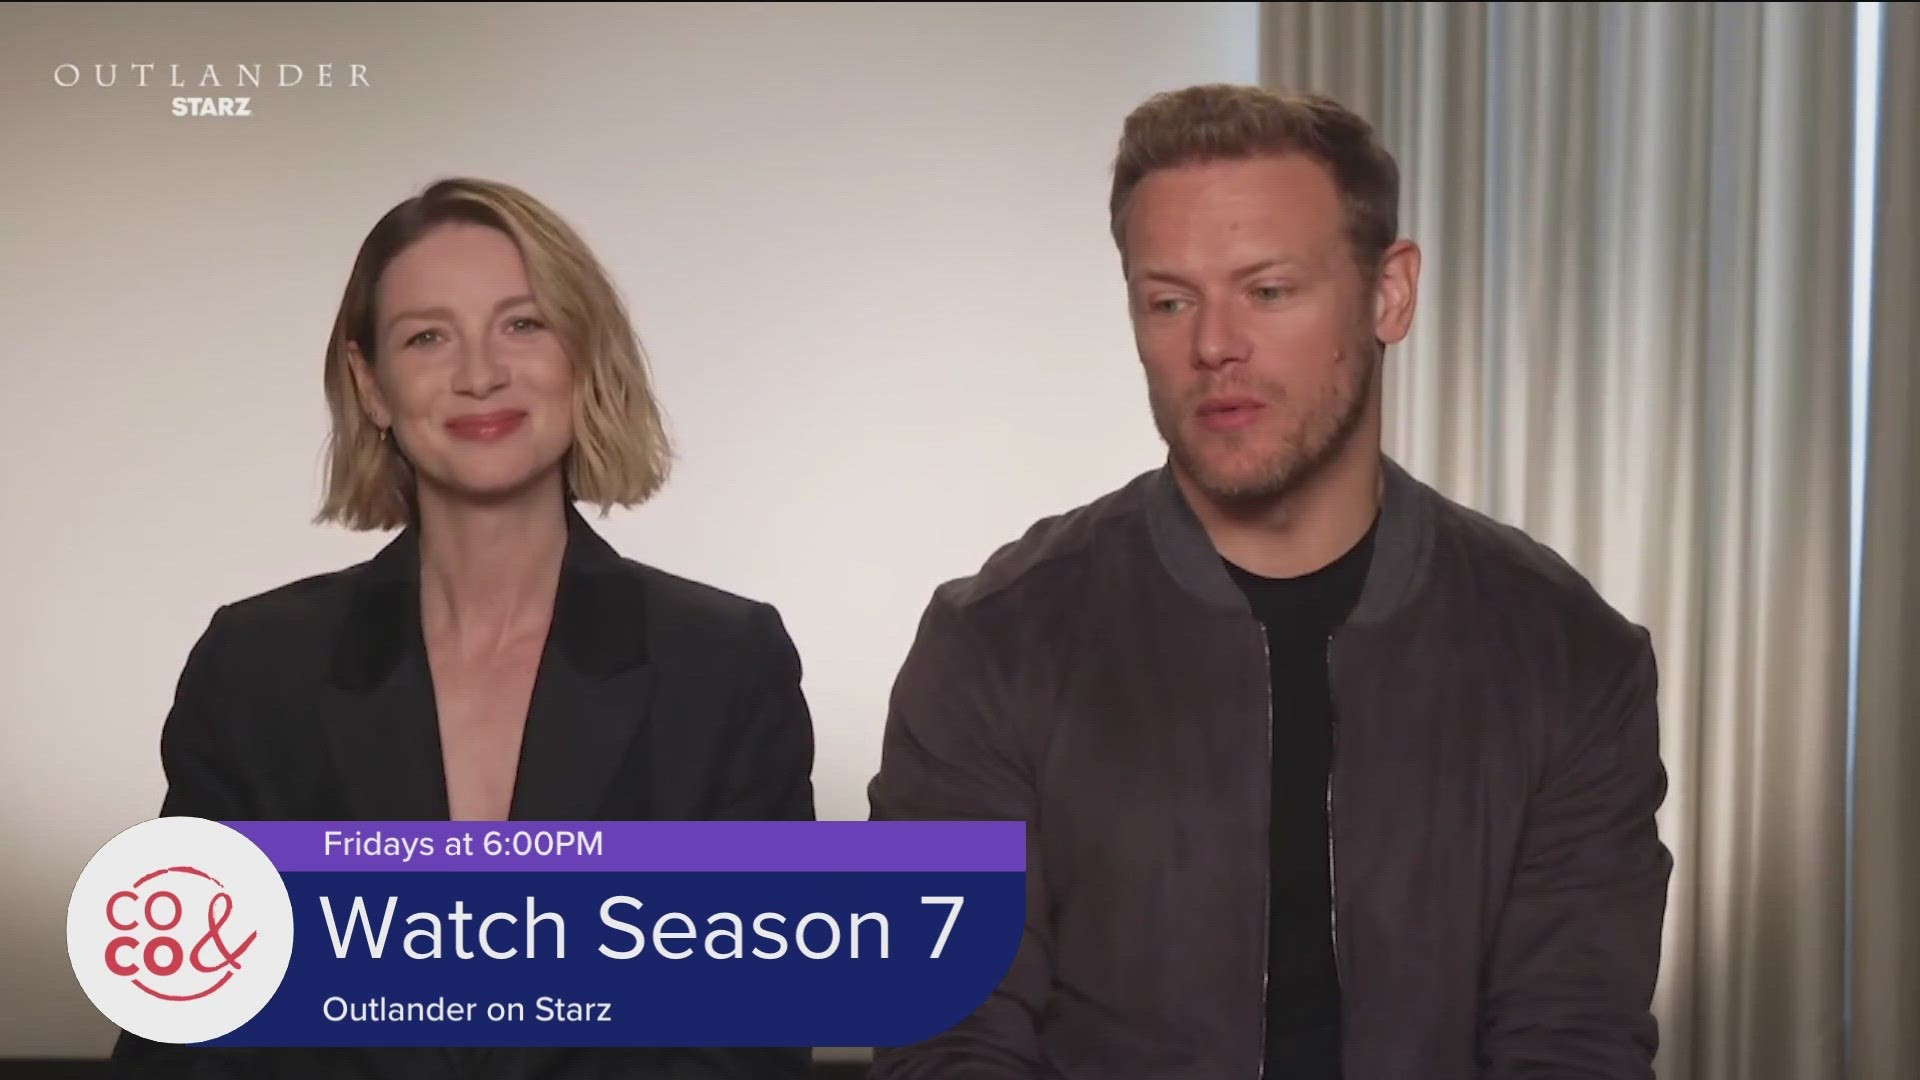 Dani chats with the stars who play Claire and Jamie Fraser from "Outlander". Join the millions who watch this romantic romp through time.